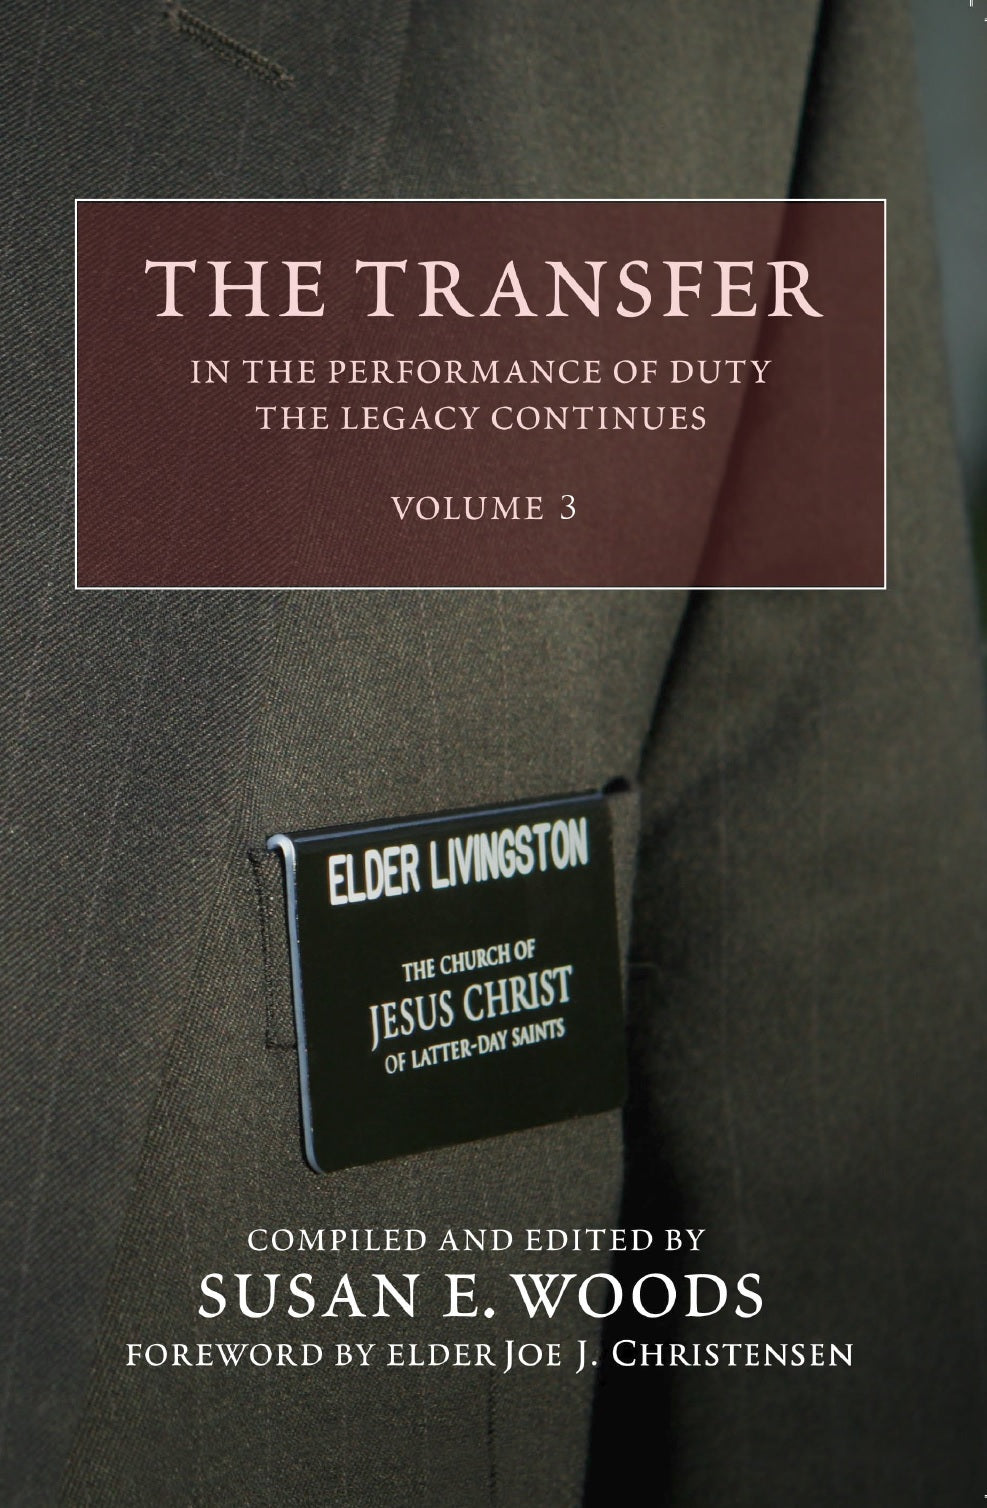 The Transfer, Volume 3: In the Performance of Duty the Legacy Continues (Softcover)